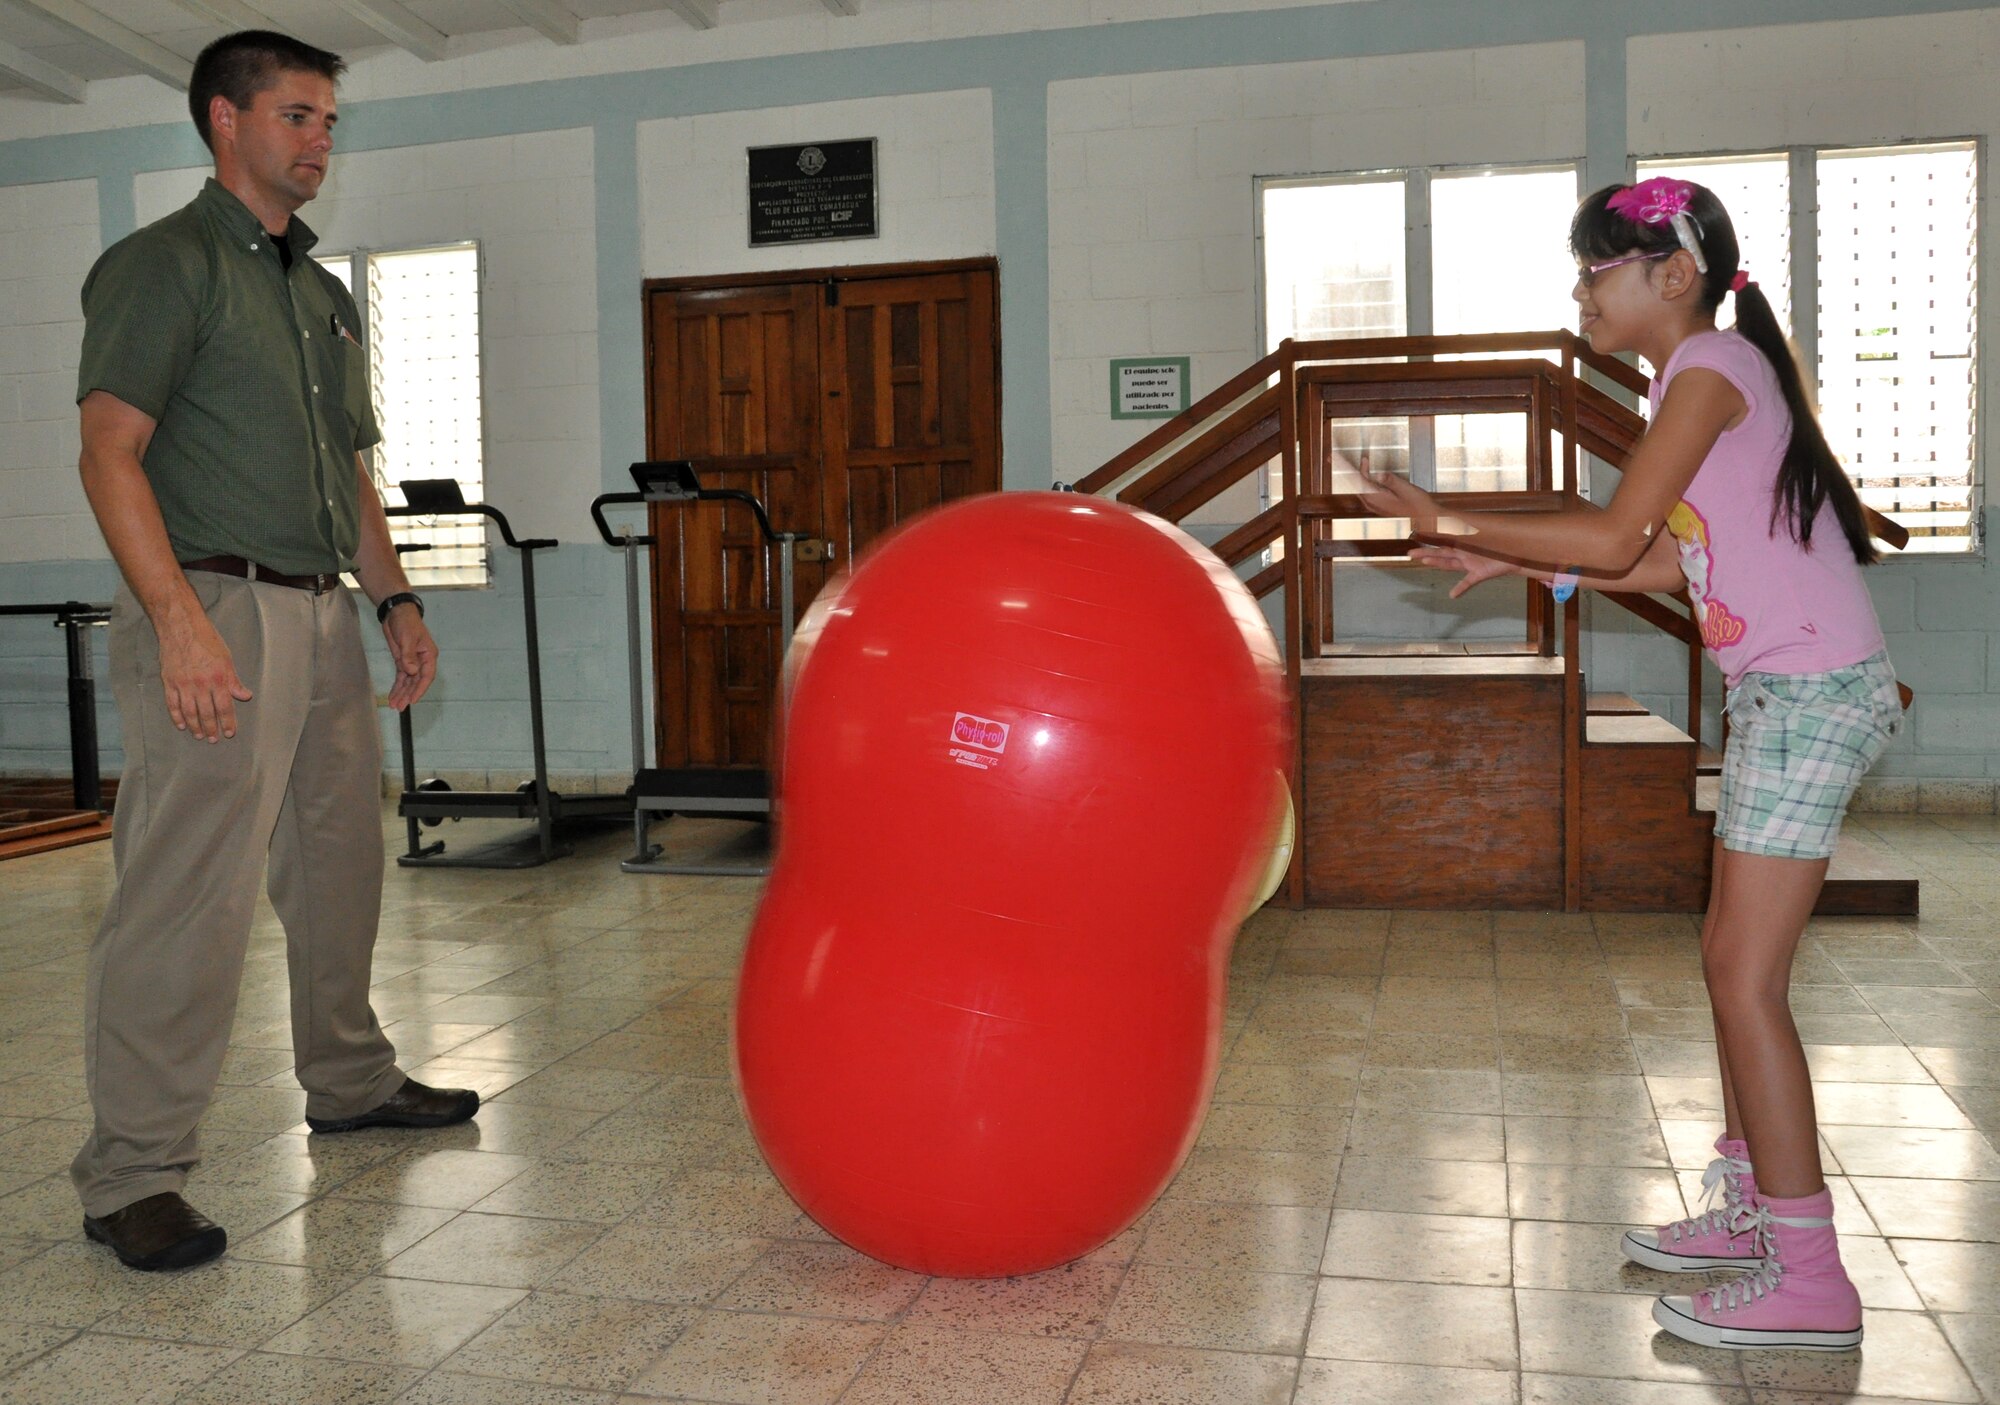 U.S. Army Capt. Joshua Brooks, Medical Element Physical Therapist officer-in-charge, uses an isokinetic peanut ball to help a young patient at the Comprehensive Rehabilitation Center in Comayagua, July 30, 2013. Physical therapists from MEDEL have helped more than 270 patients this year in part to help solidify the U.S. and Honduras ongoing partnerships and cooperation efforts.  